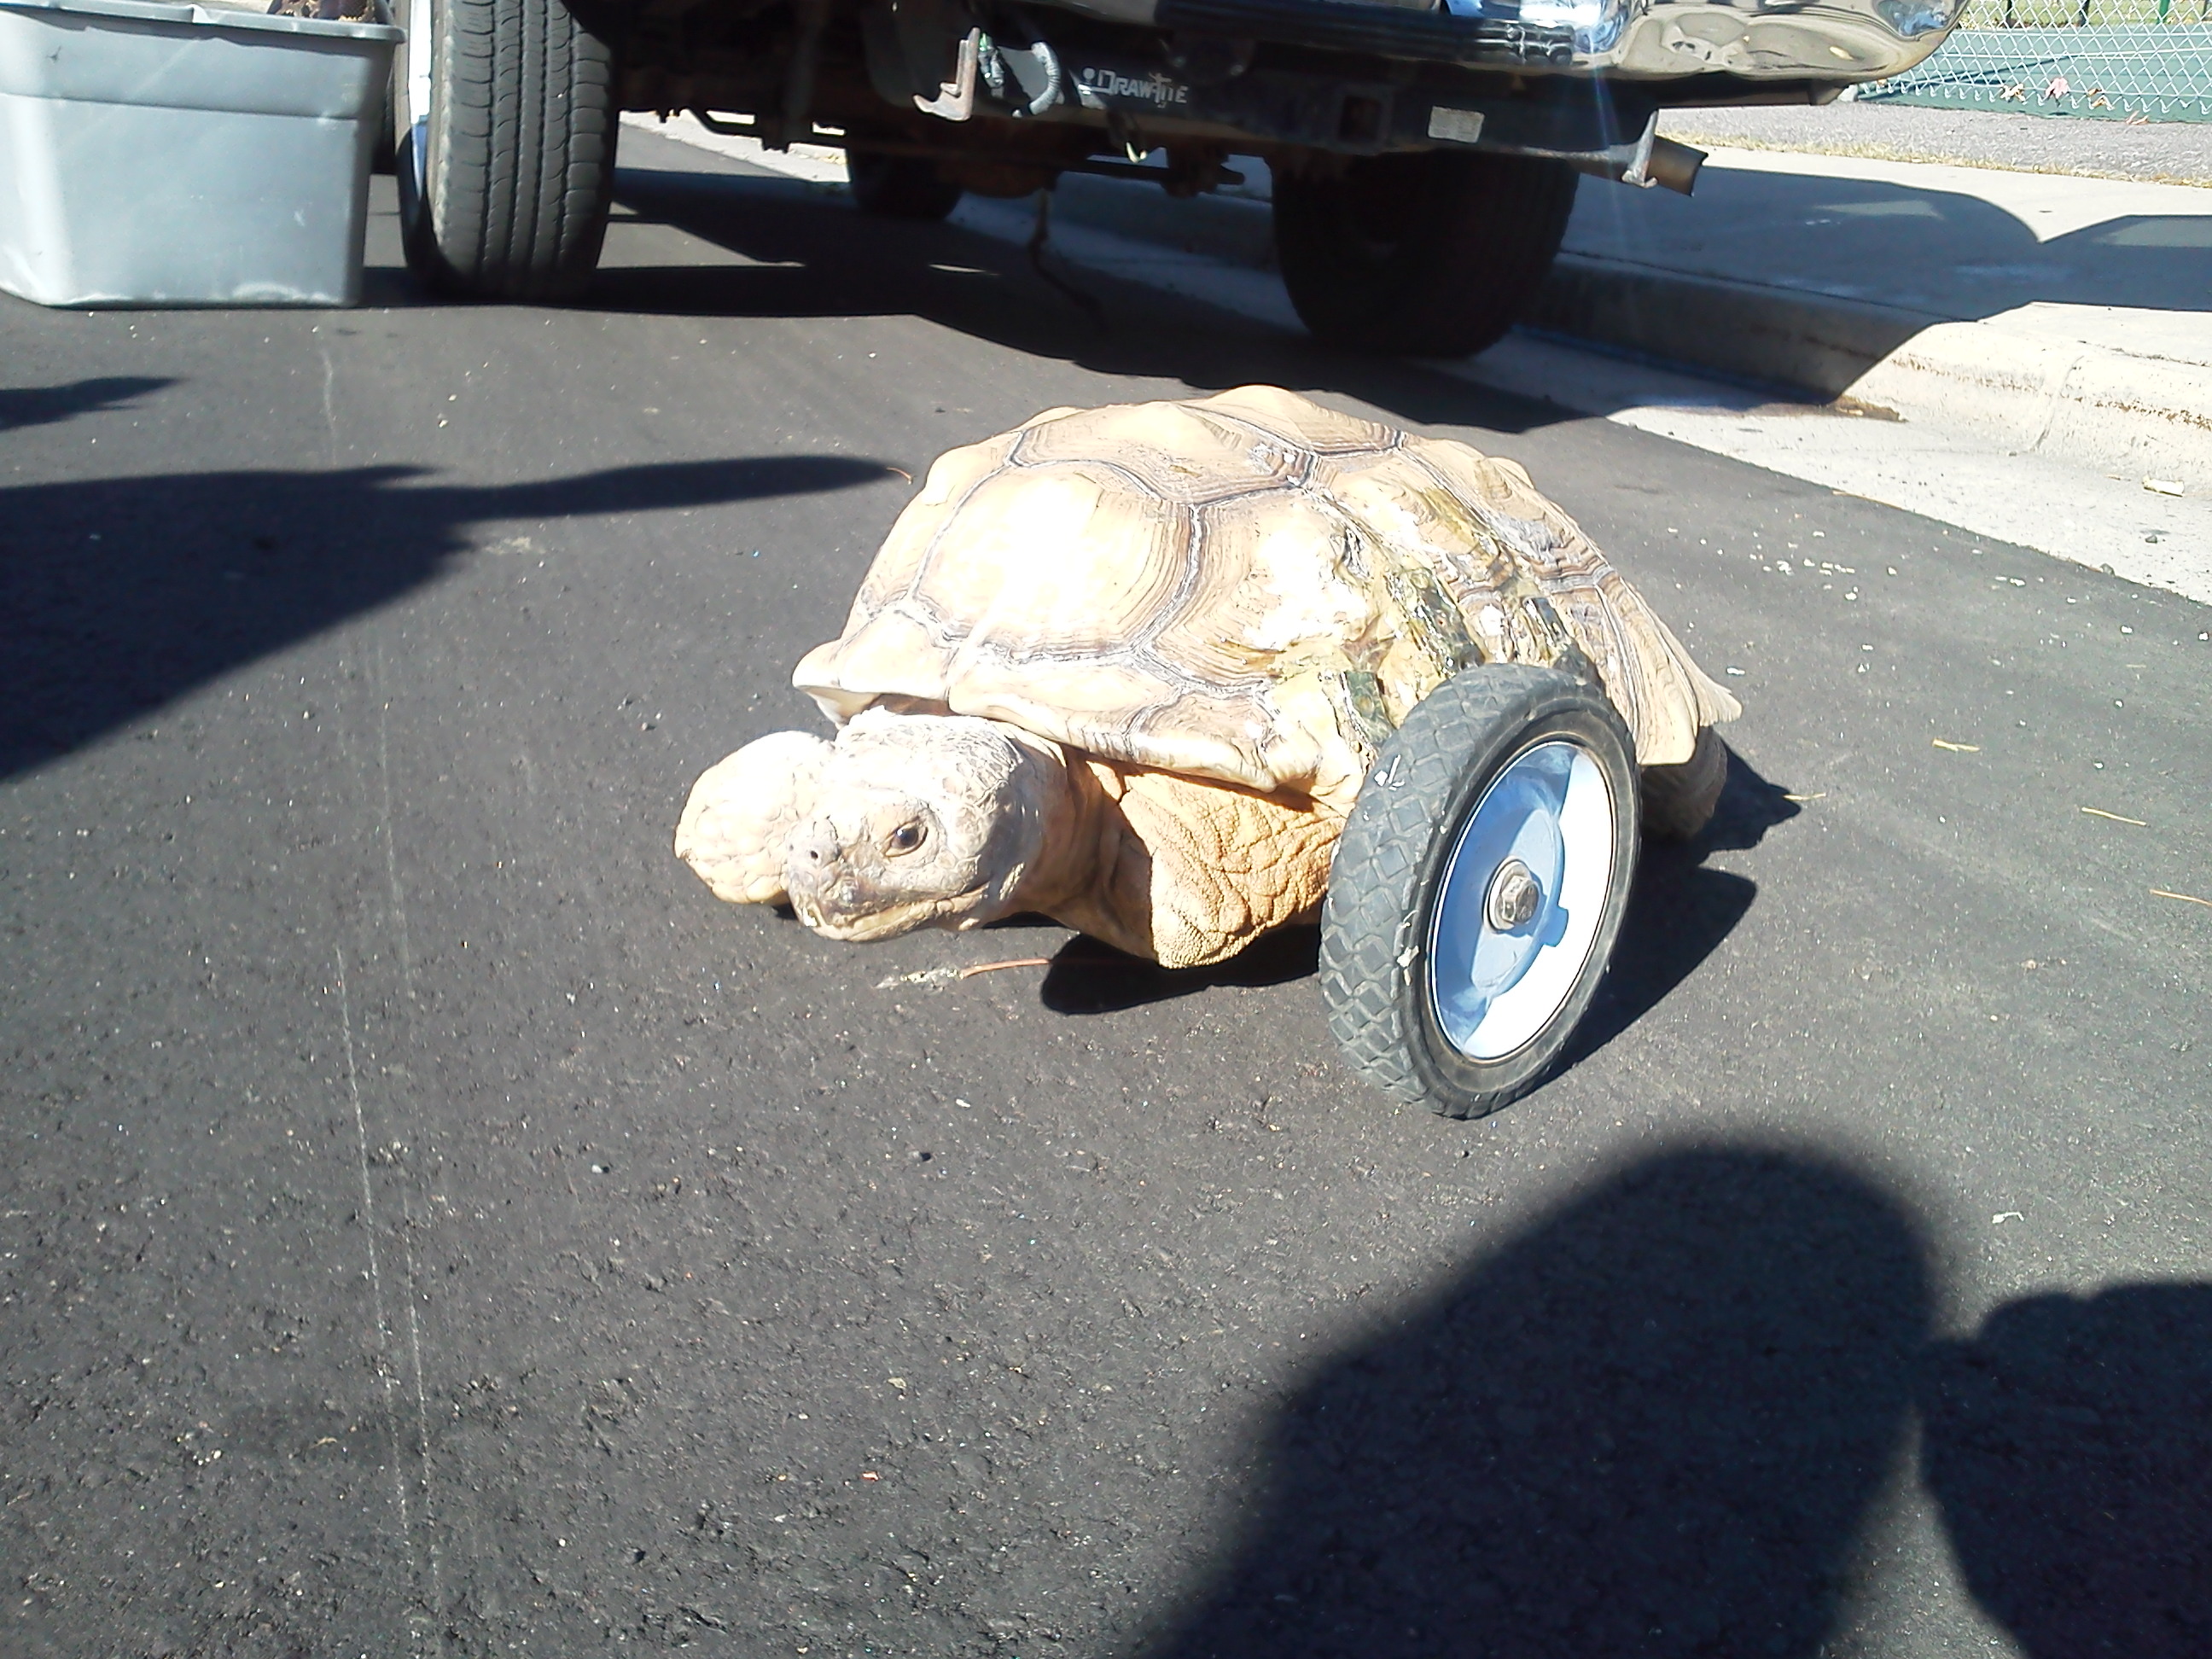 "Stumpy" the African Spurrred tortoise was one of 15 reptiles recovered when police found Phil Rakoci's stolen SUV on Oct. 18, 2012. (Photo: Dan Gillett)